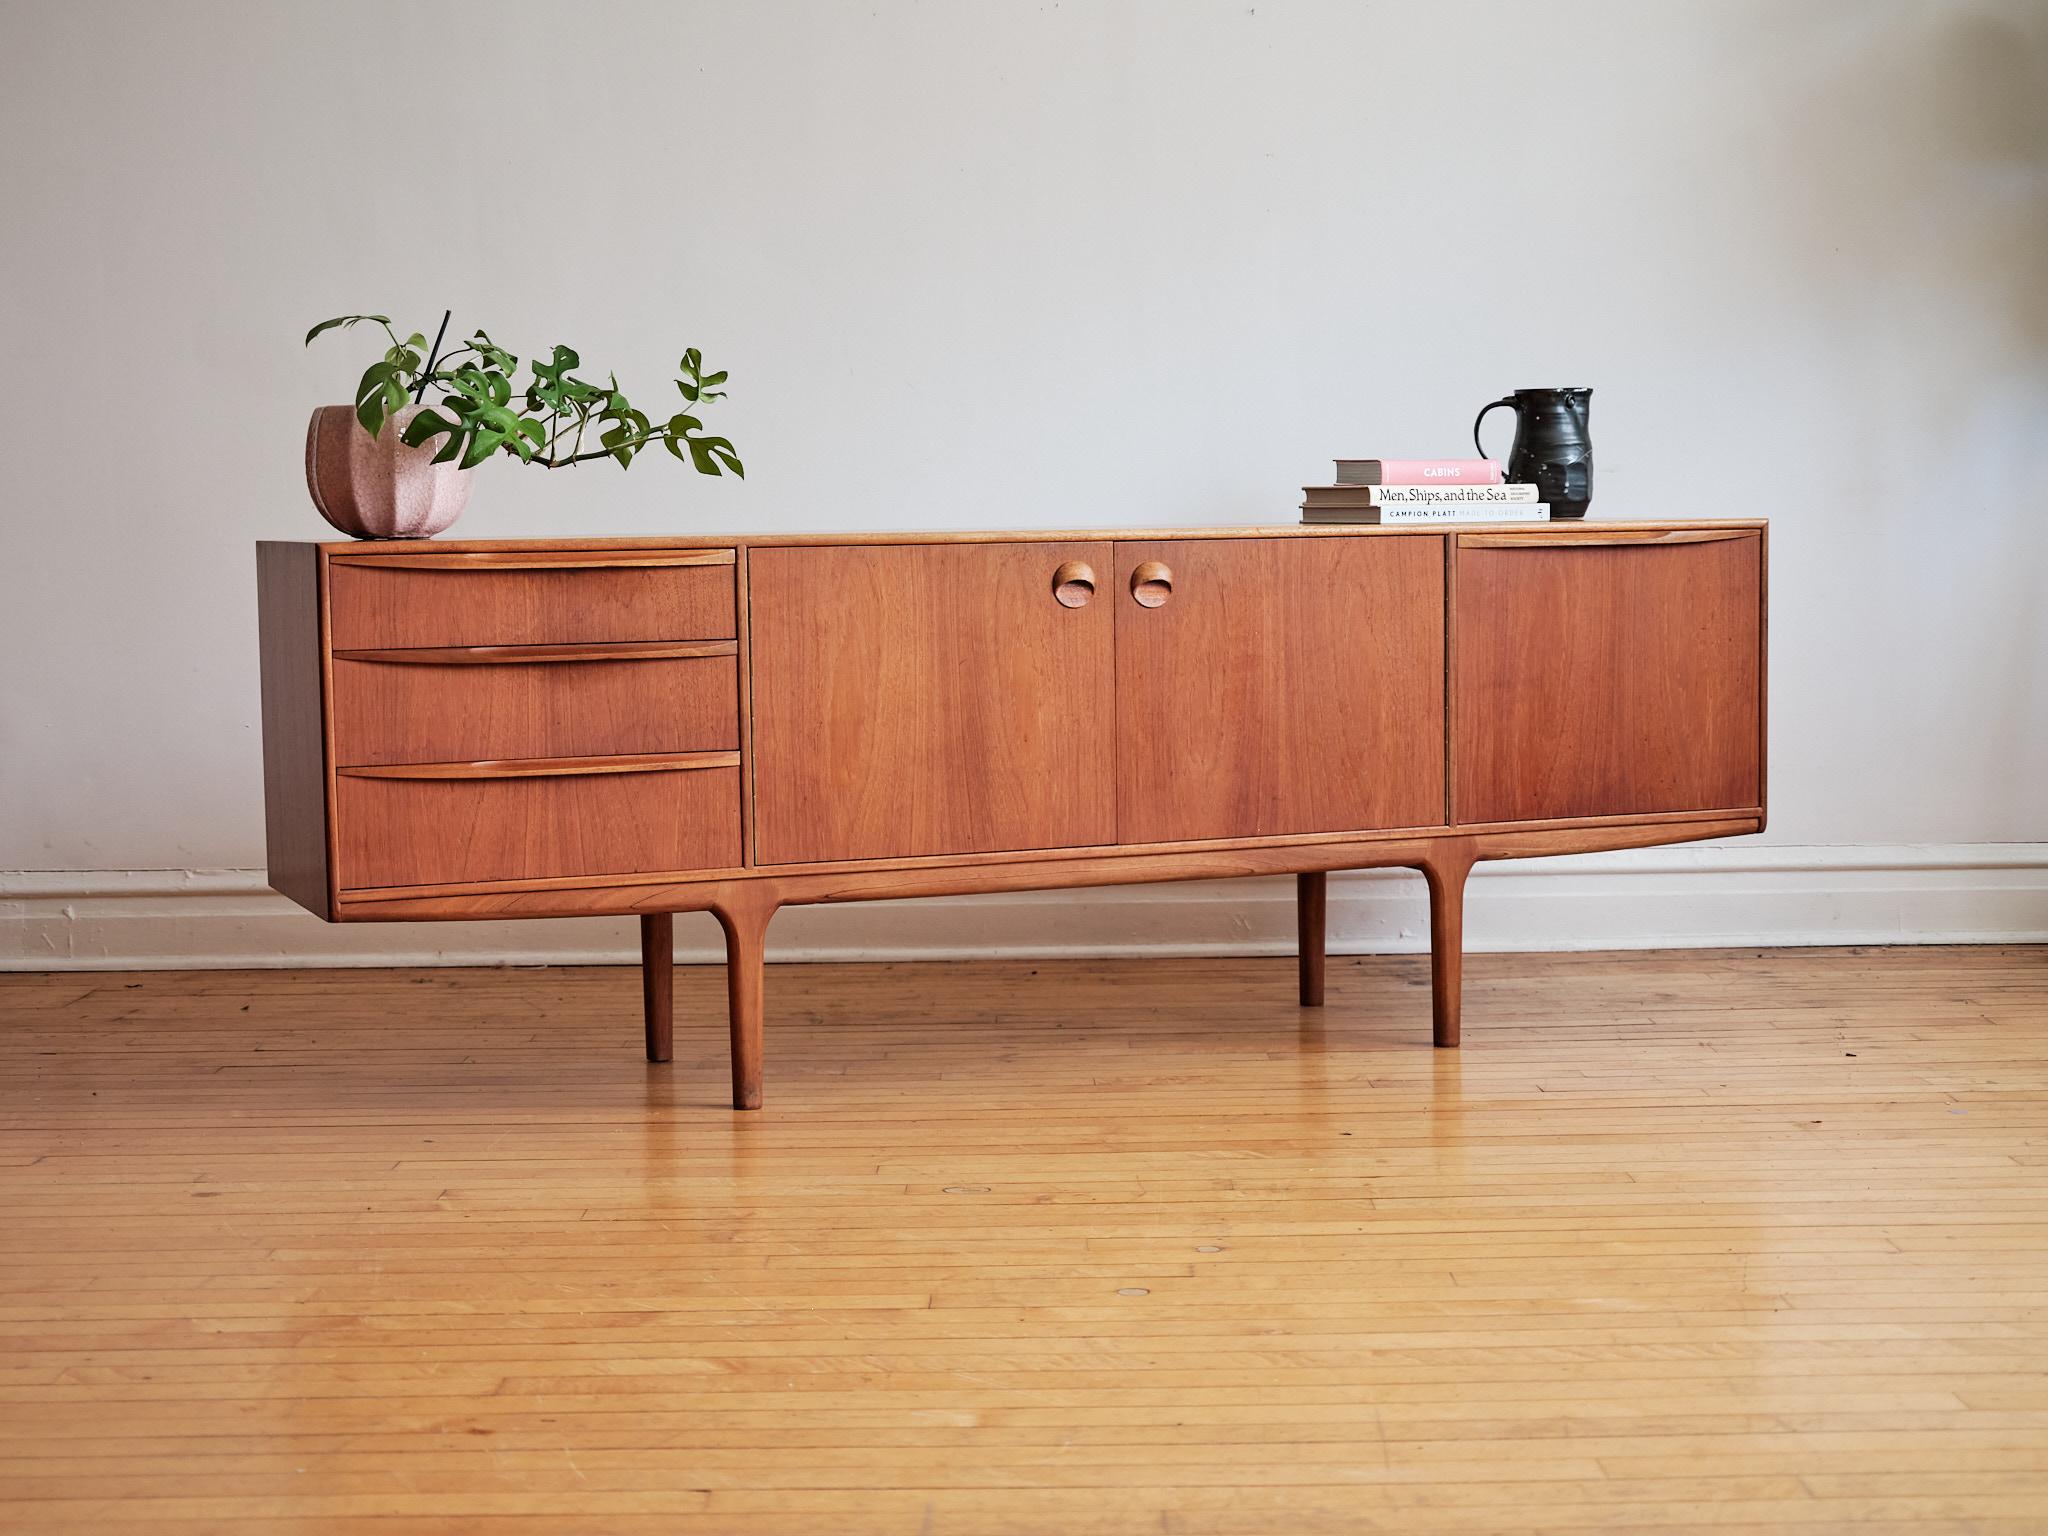 Mid-Century Modern teak wood credenza.
Just imported from England to Chicago. 
Made in Scotland by McIntosh.
Beautifully carved wooden handles.
Features a unique base with leg inlays.
Three dovetailed drawers; top drawer holds built-in